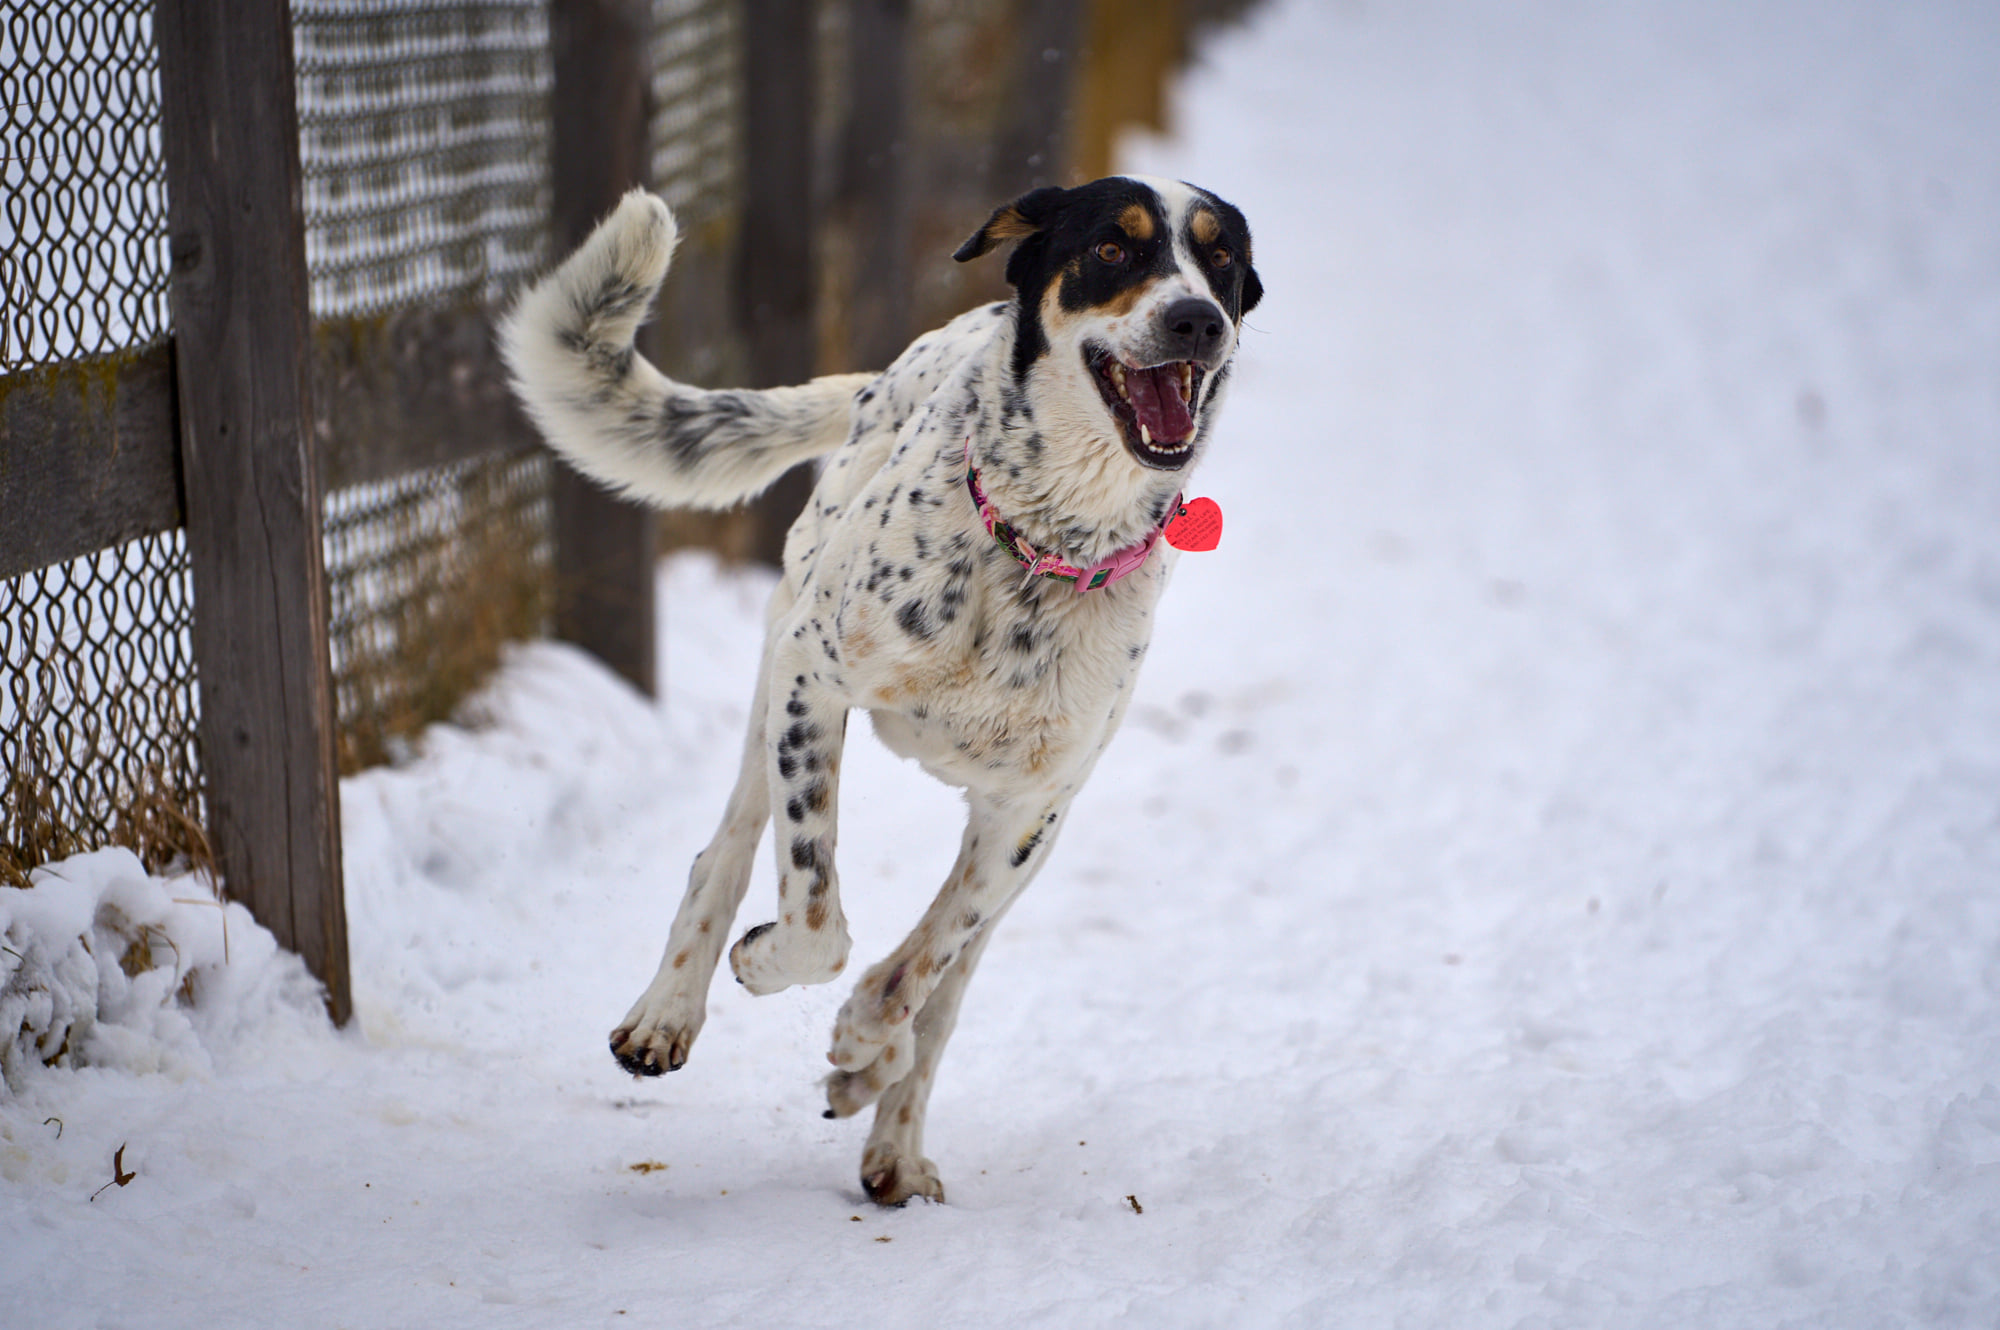 Lily running in the snow